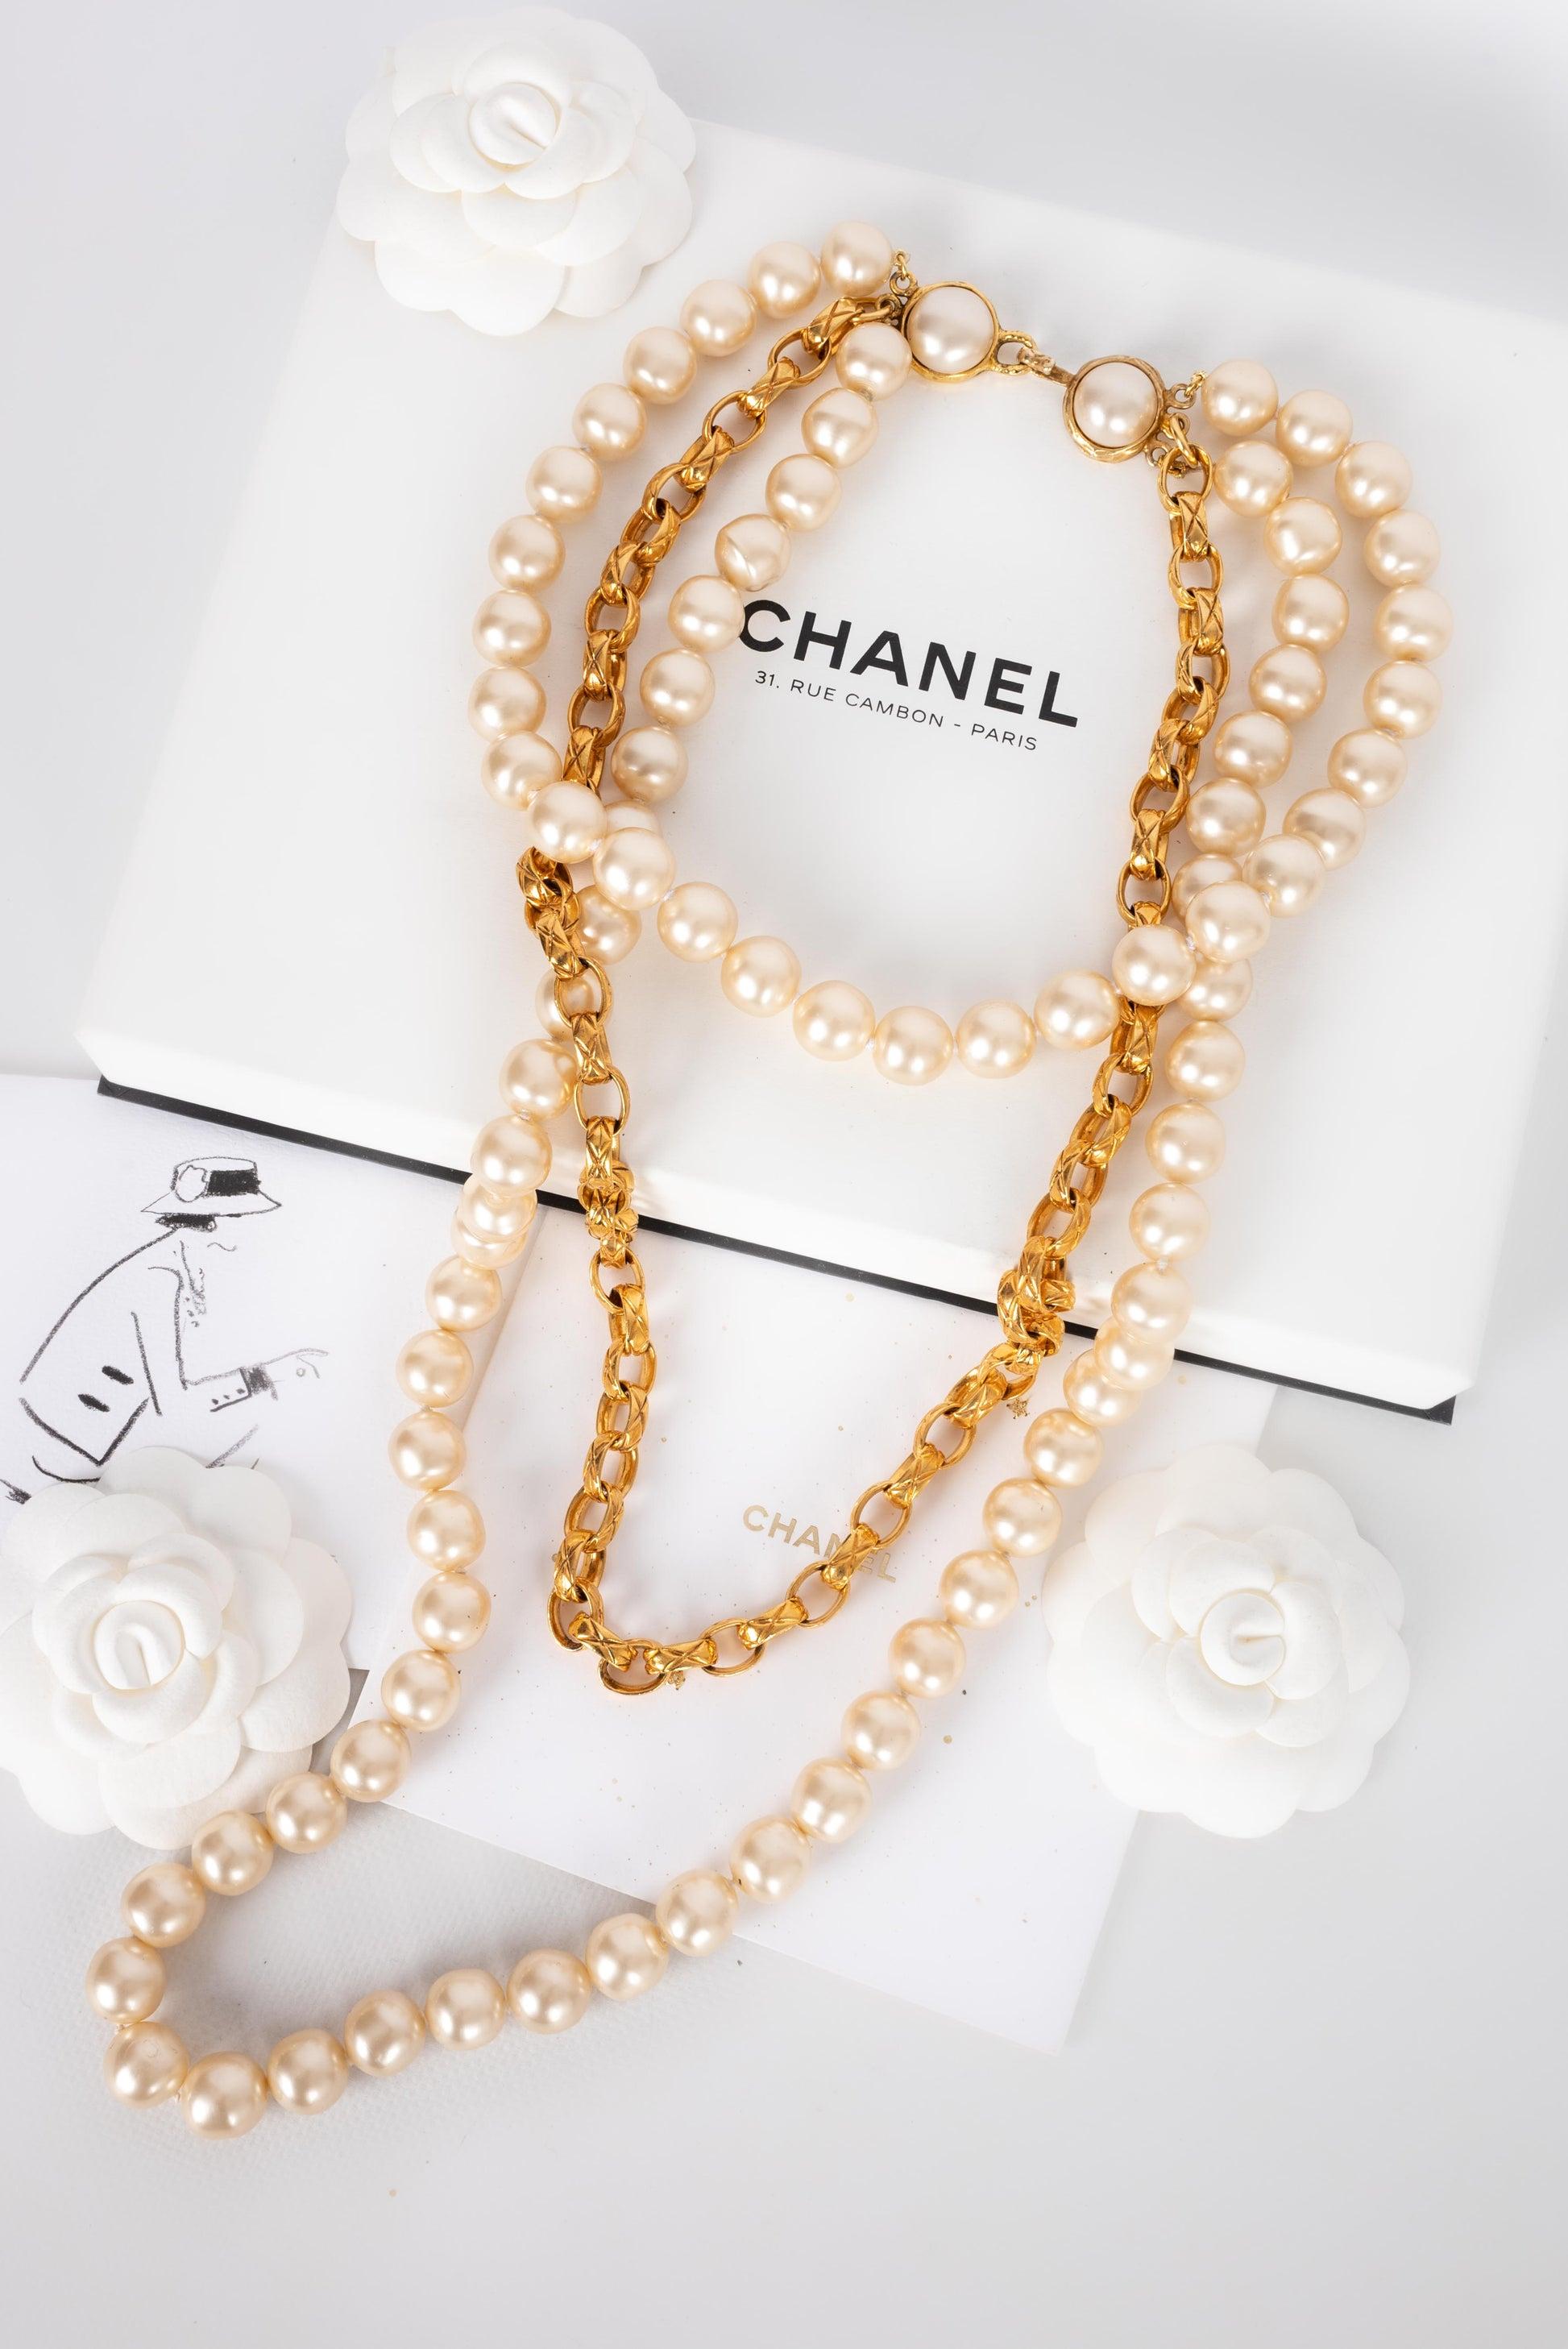 Chanel Necklace in Gold-Plated Metal and Costume Pearly Beads, 1990s For Sale 5